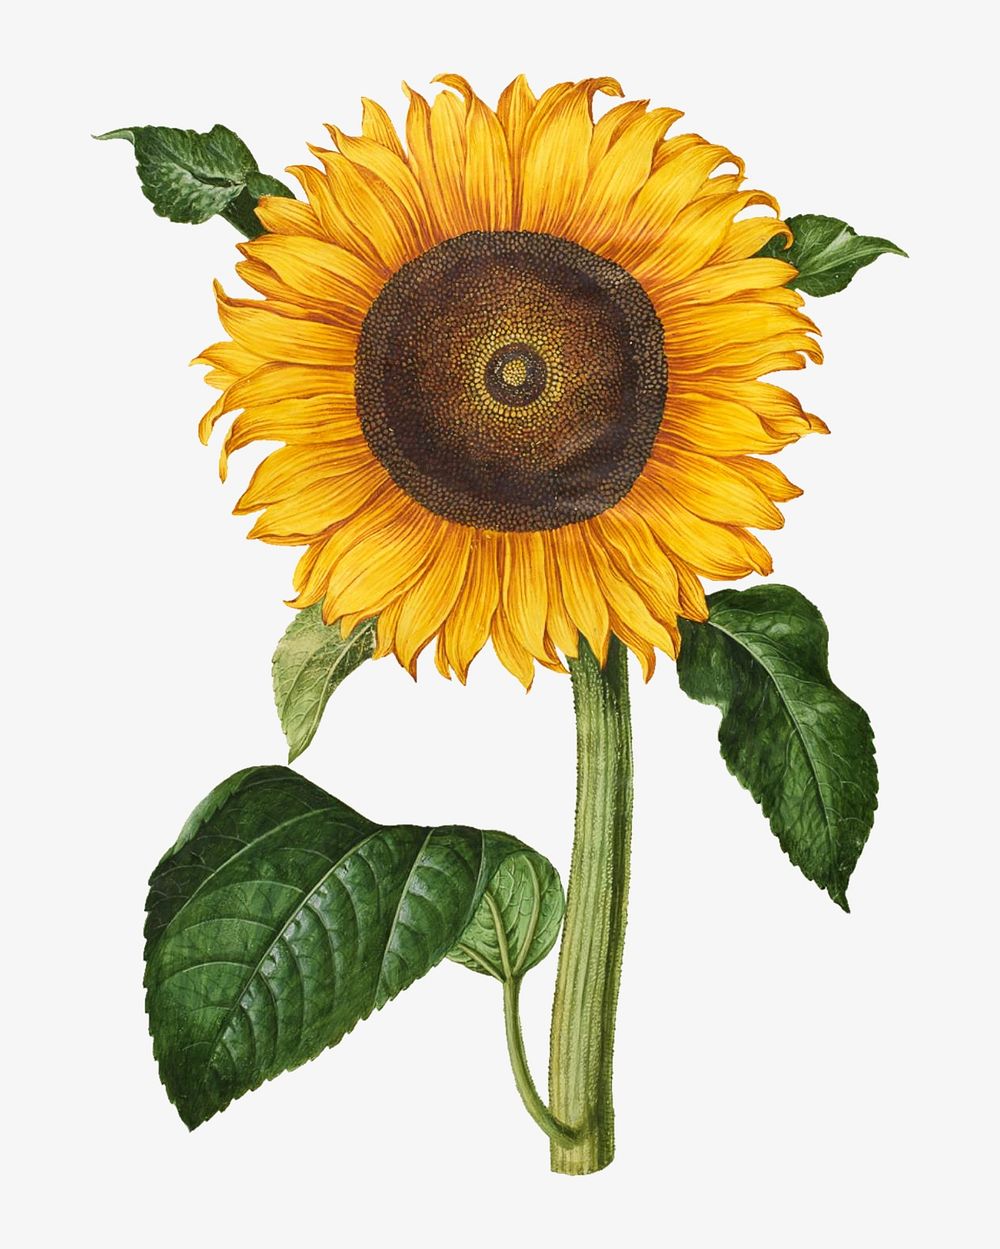 Vintage sunflower, flower illustration by Maria Sibylla Merian. Remixed by rawpixel.